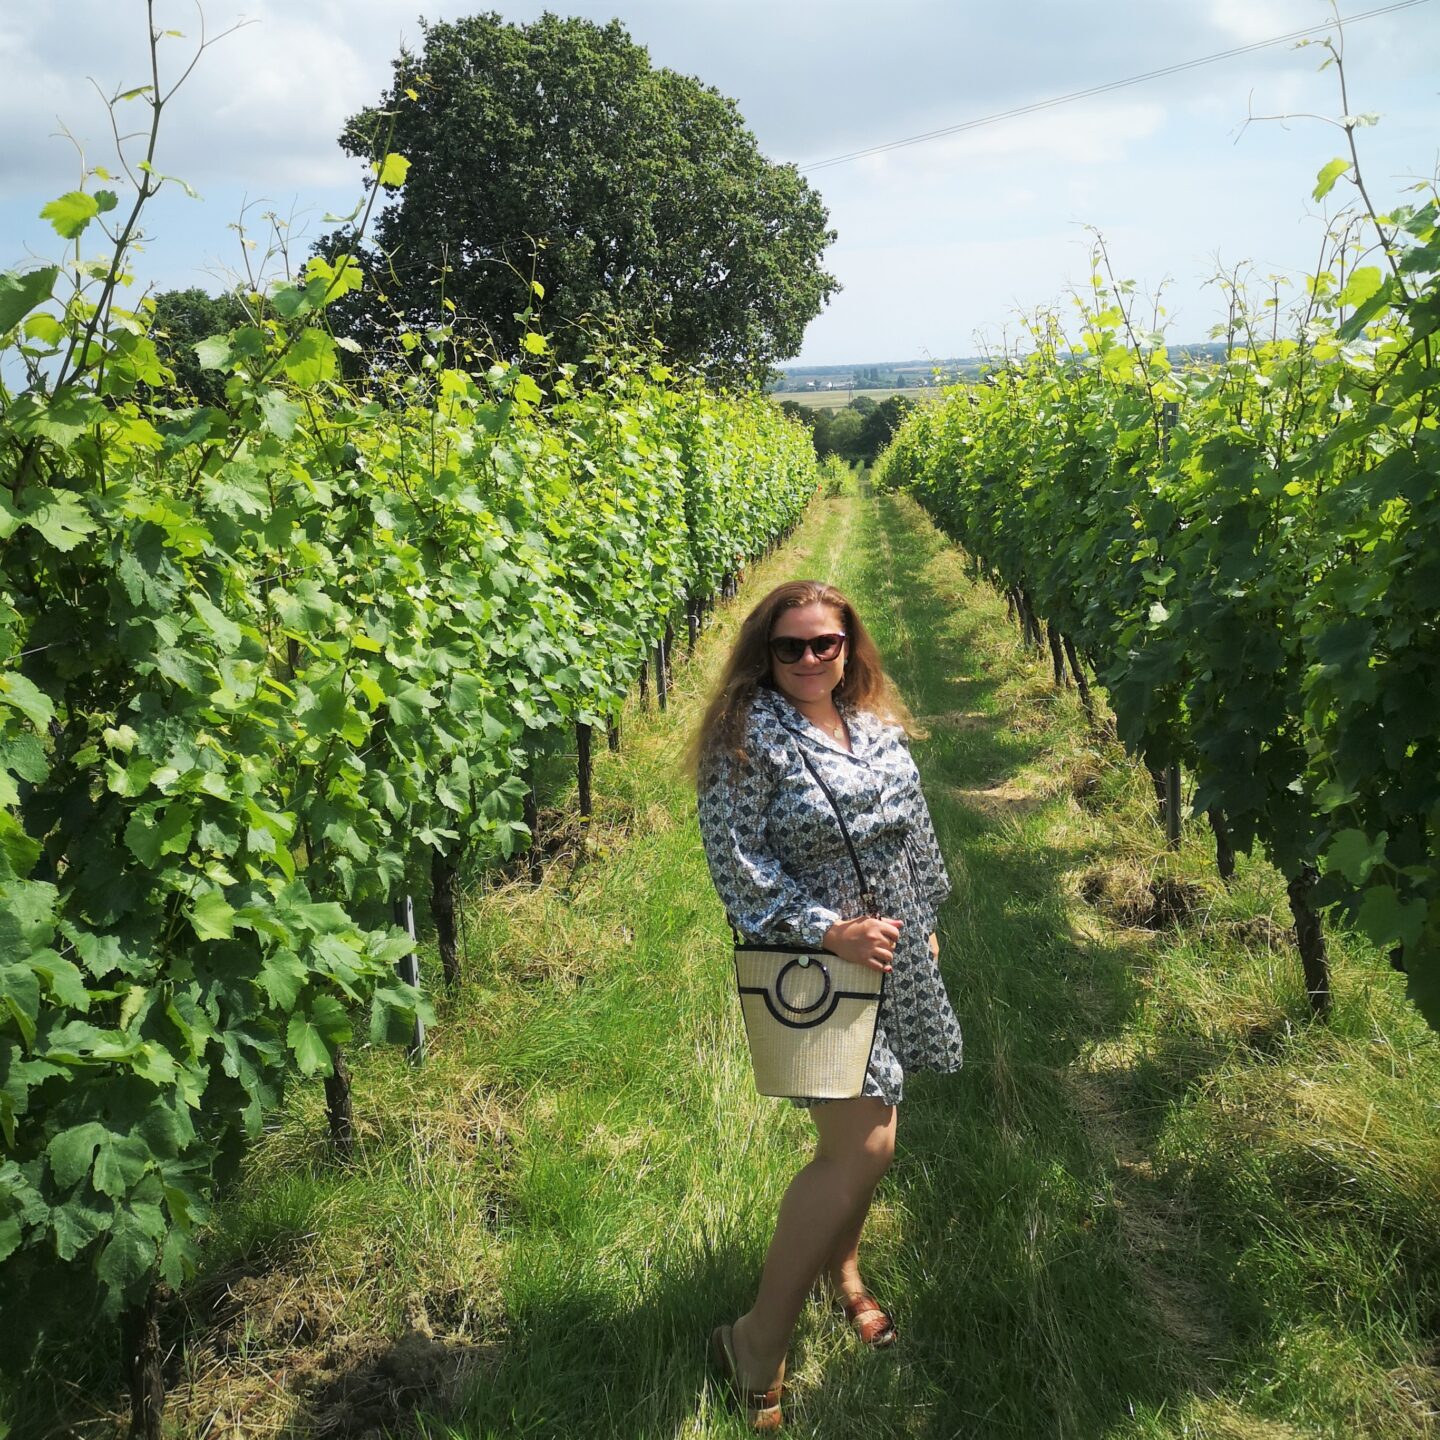 Picnic For Two With Gusbourne Wines, Gusbourne Vintage English Wines, English Sparkling Wines, Boutique English Winery, Things to do in Kent, Kent Life, Romantic Time, Appledore, Summer In Kent, Win, Giveaway, The Frenchie Mummy 